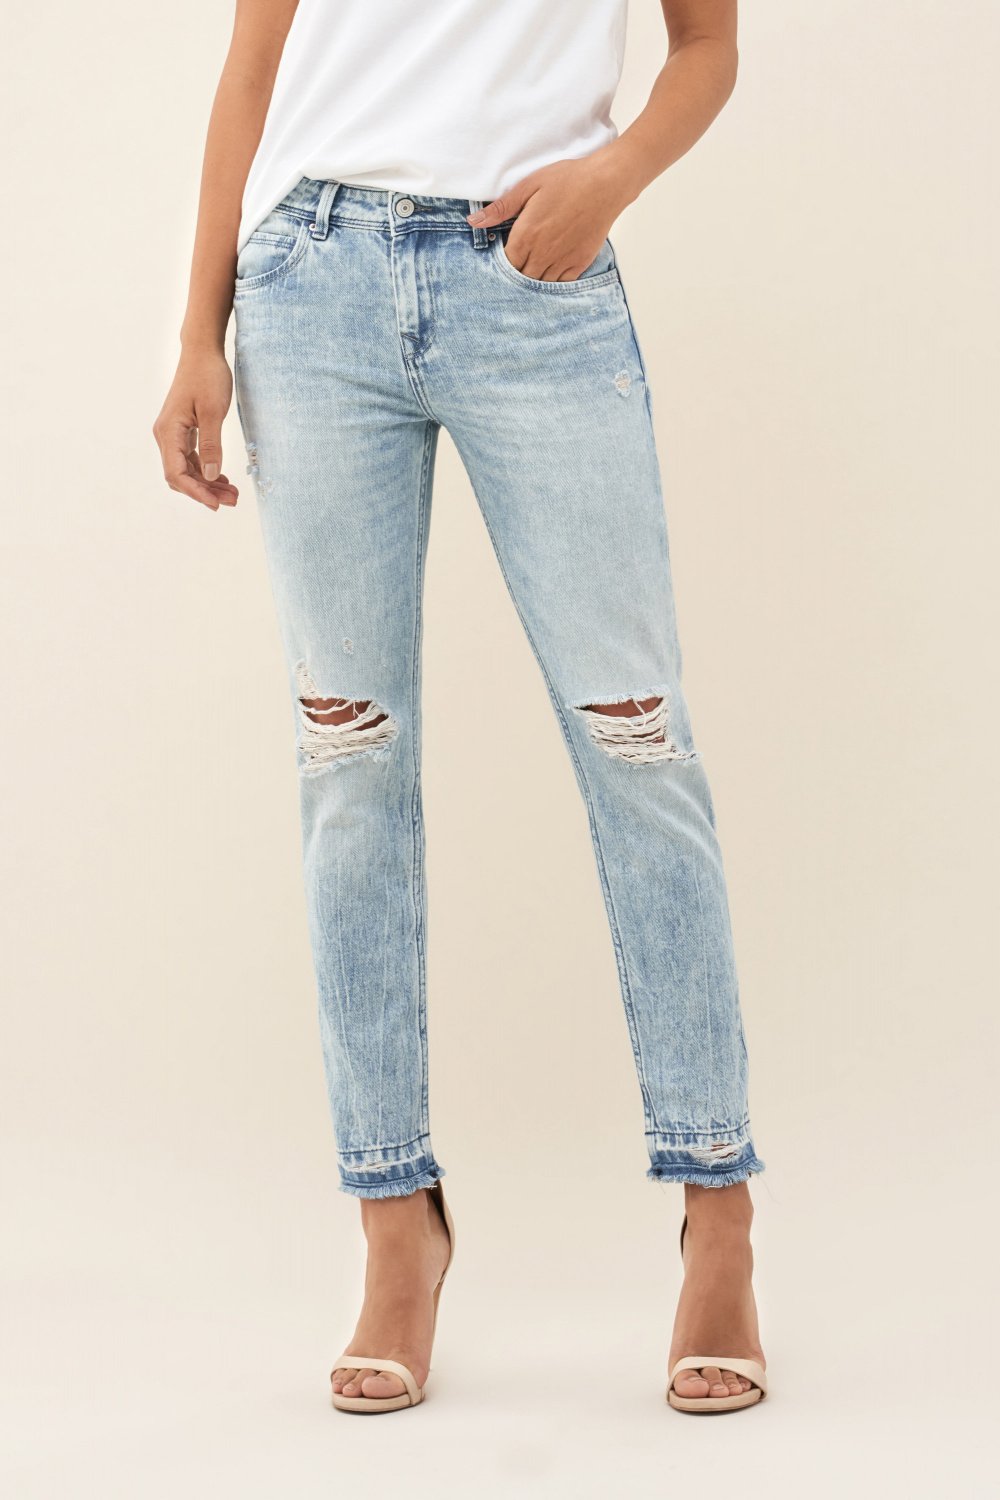 Salsa Jeans / You can select from multiple options such as distressed ...